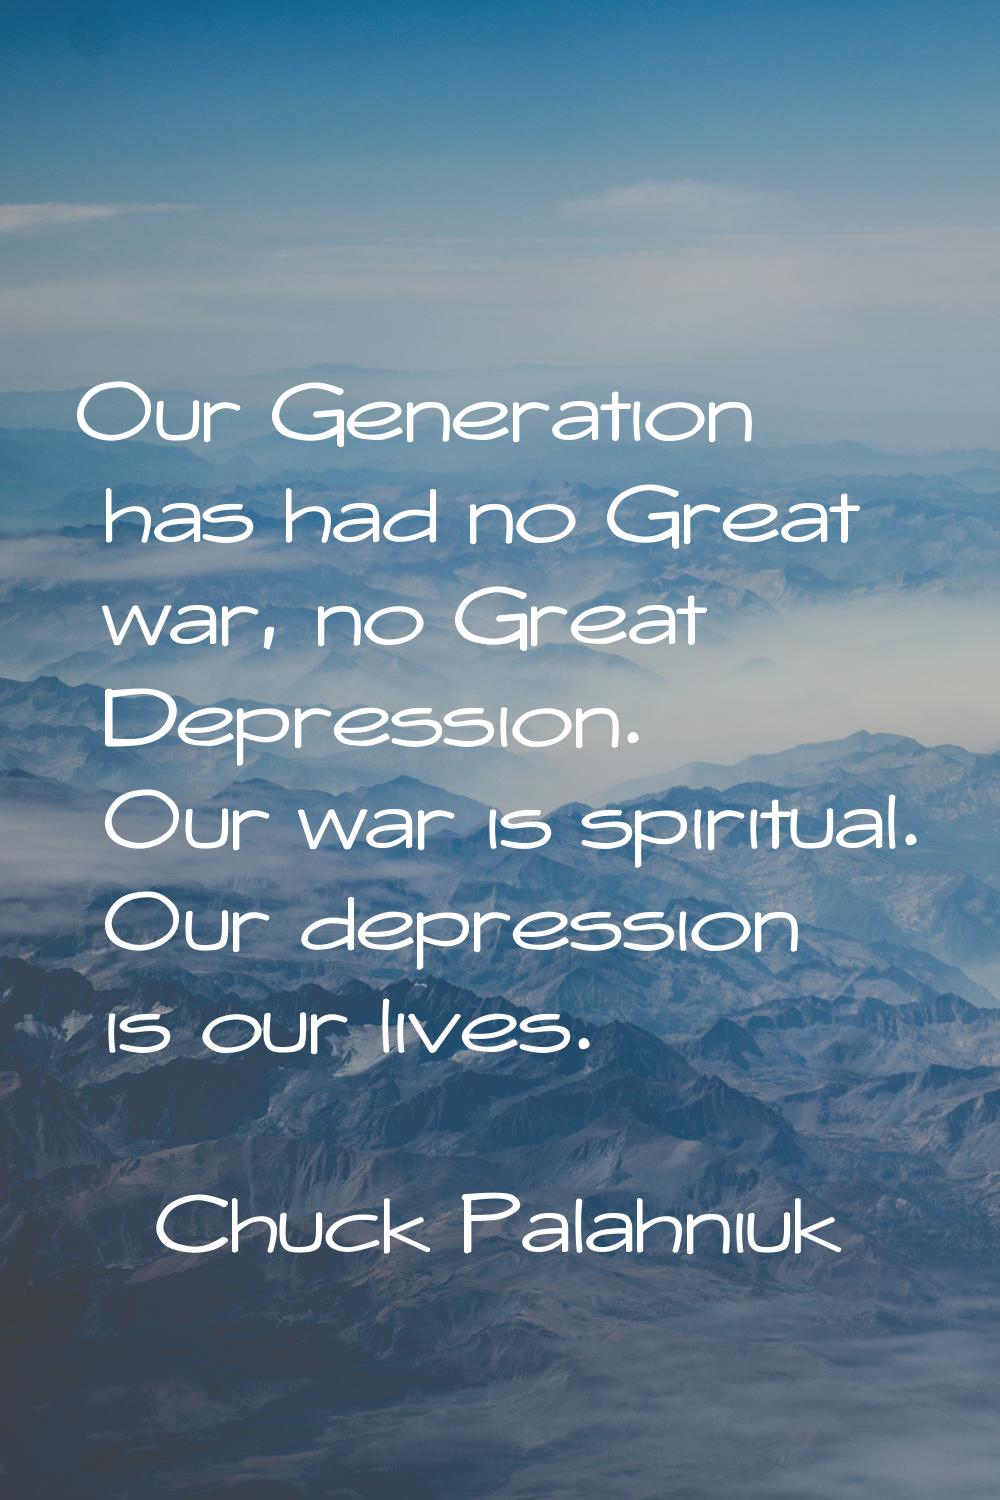 Our Generation has had no Great war, no Great Depression. Our war is spiritual. Our depression is o